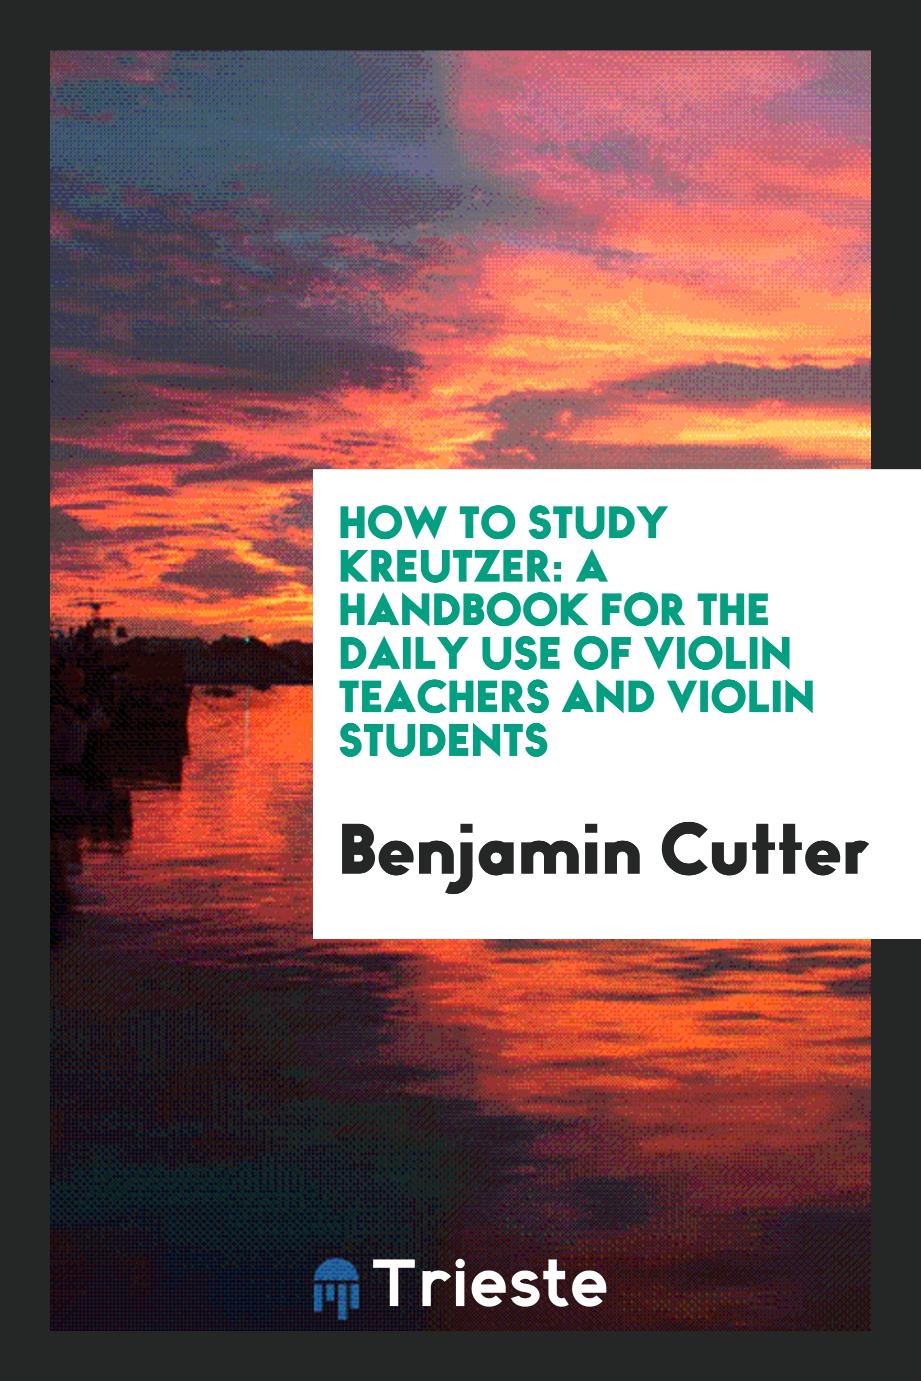 How to Study Kreutzer: A Handbook for the Daily Use of Violin Teachers and violin students